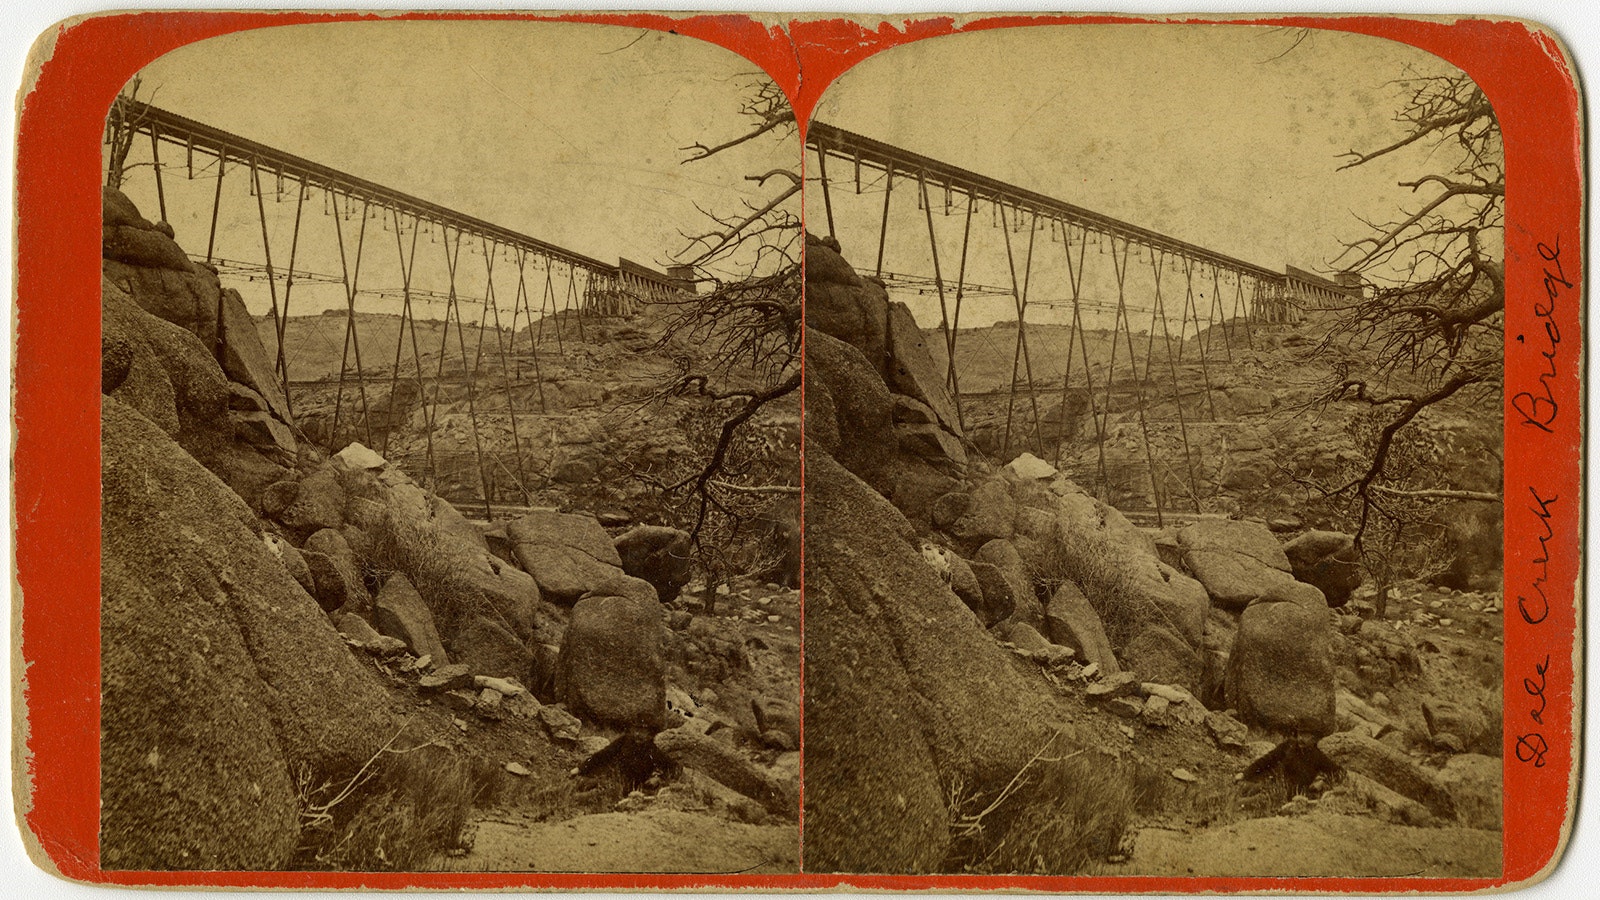 A stereo card by Charles Roscoe Savage showing the second iron Dale Creek Bridge with part of the original wooden trestle is still connected. This was taken in 1876 near Laramie, Wyoming.